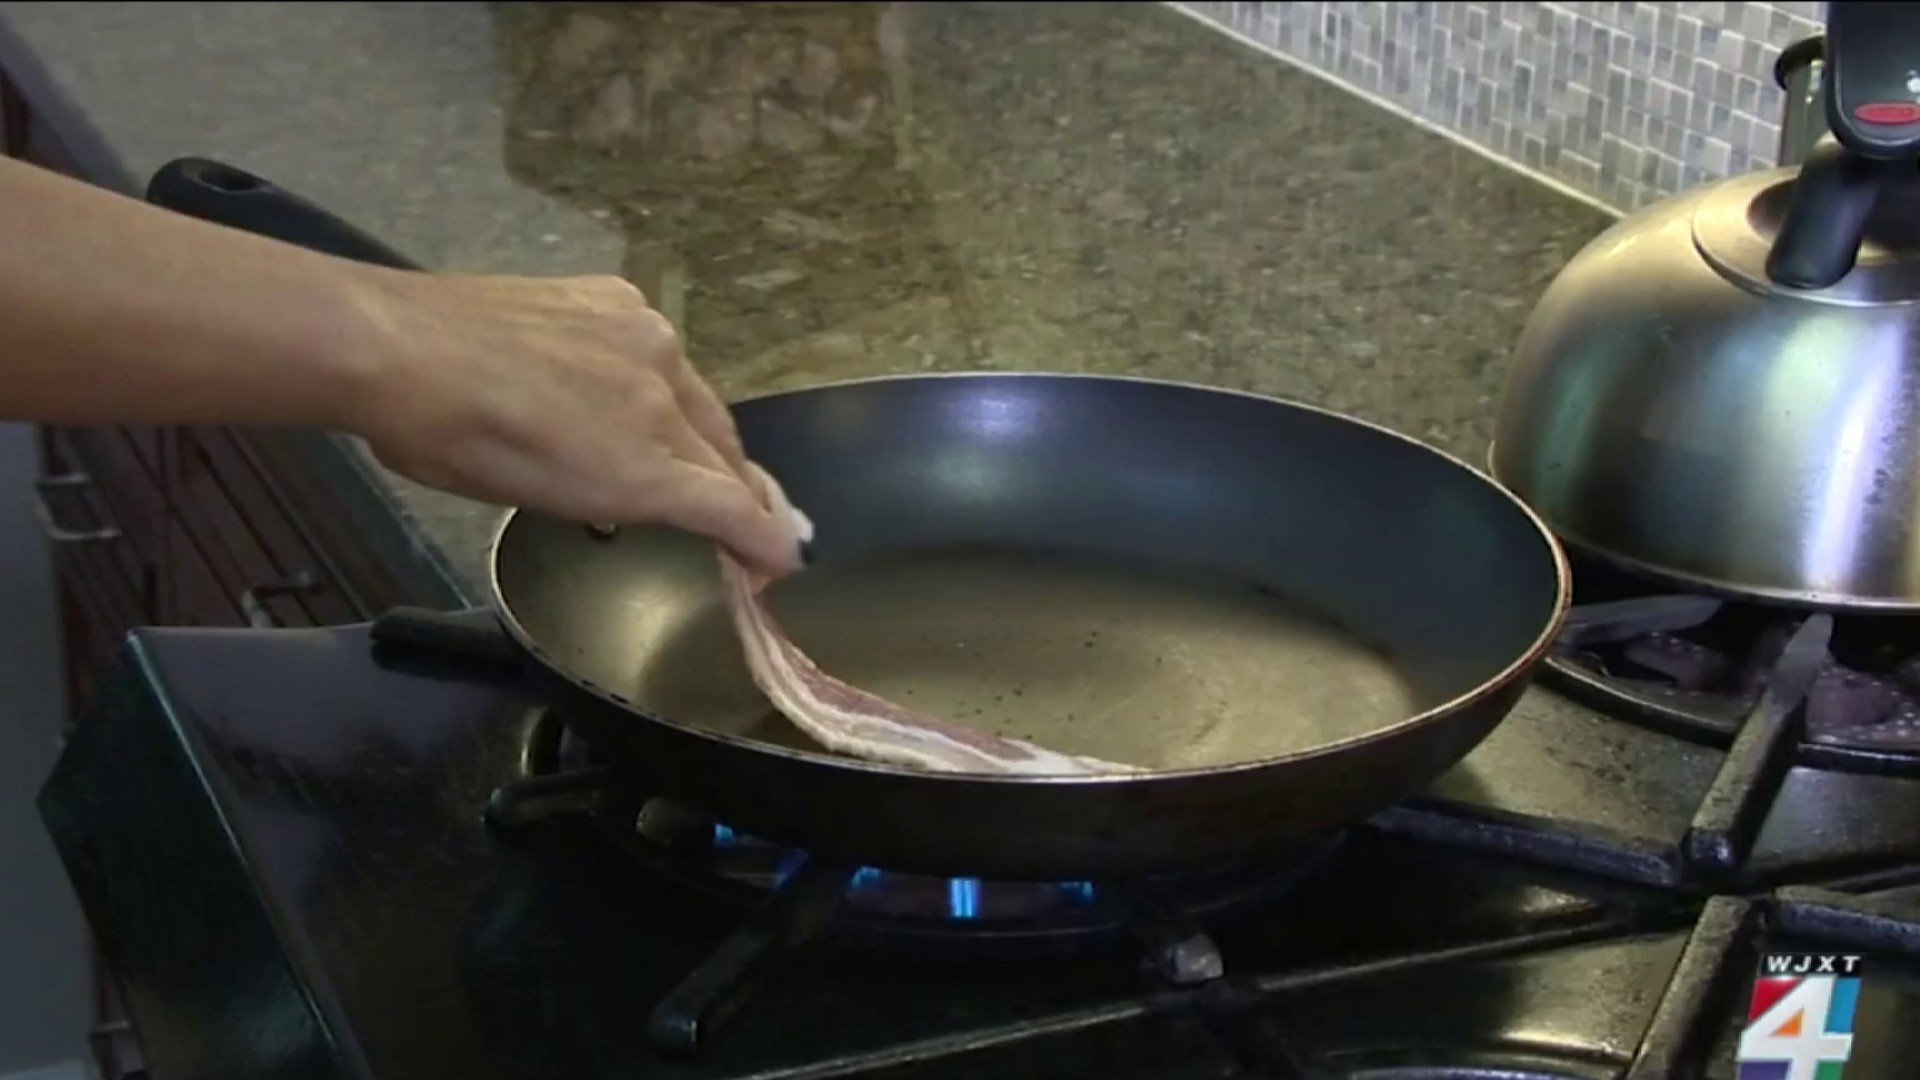 Best Frying Pans If You Want to Avoid PFAS Chemicals - Consumer